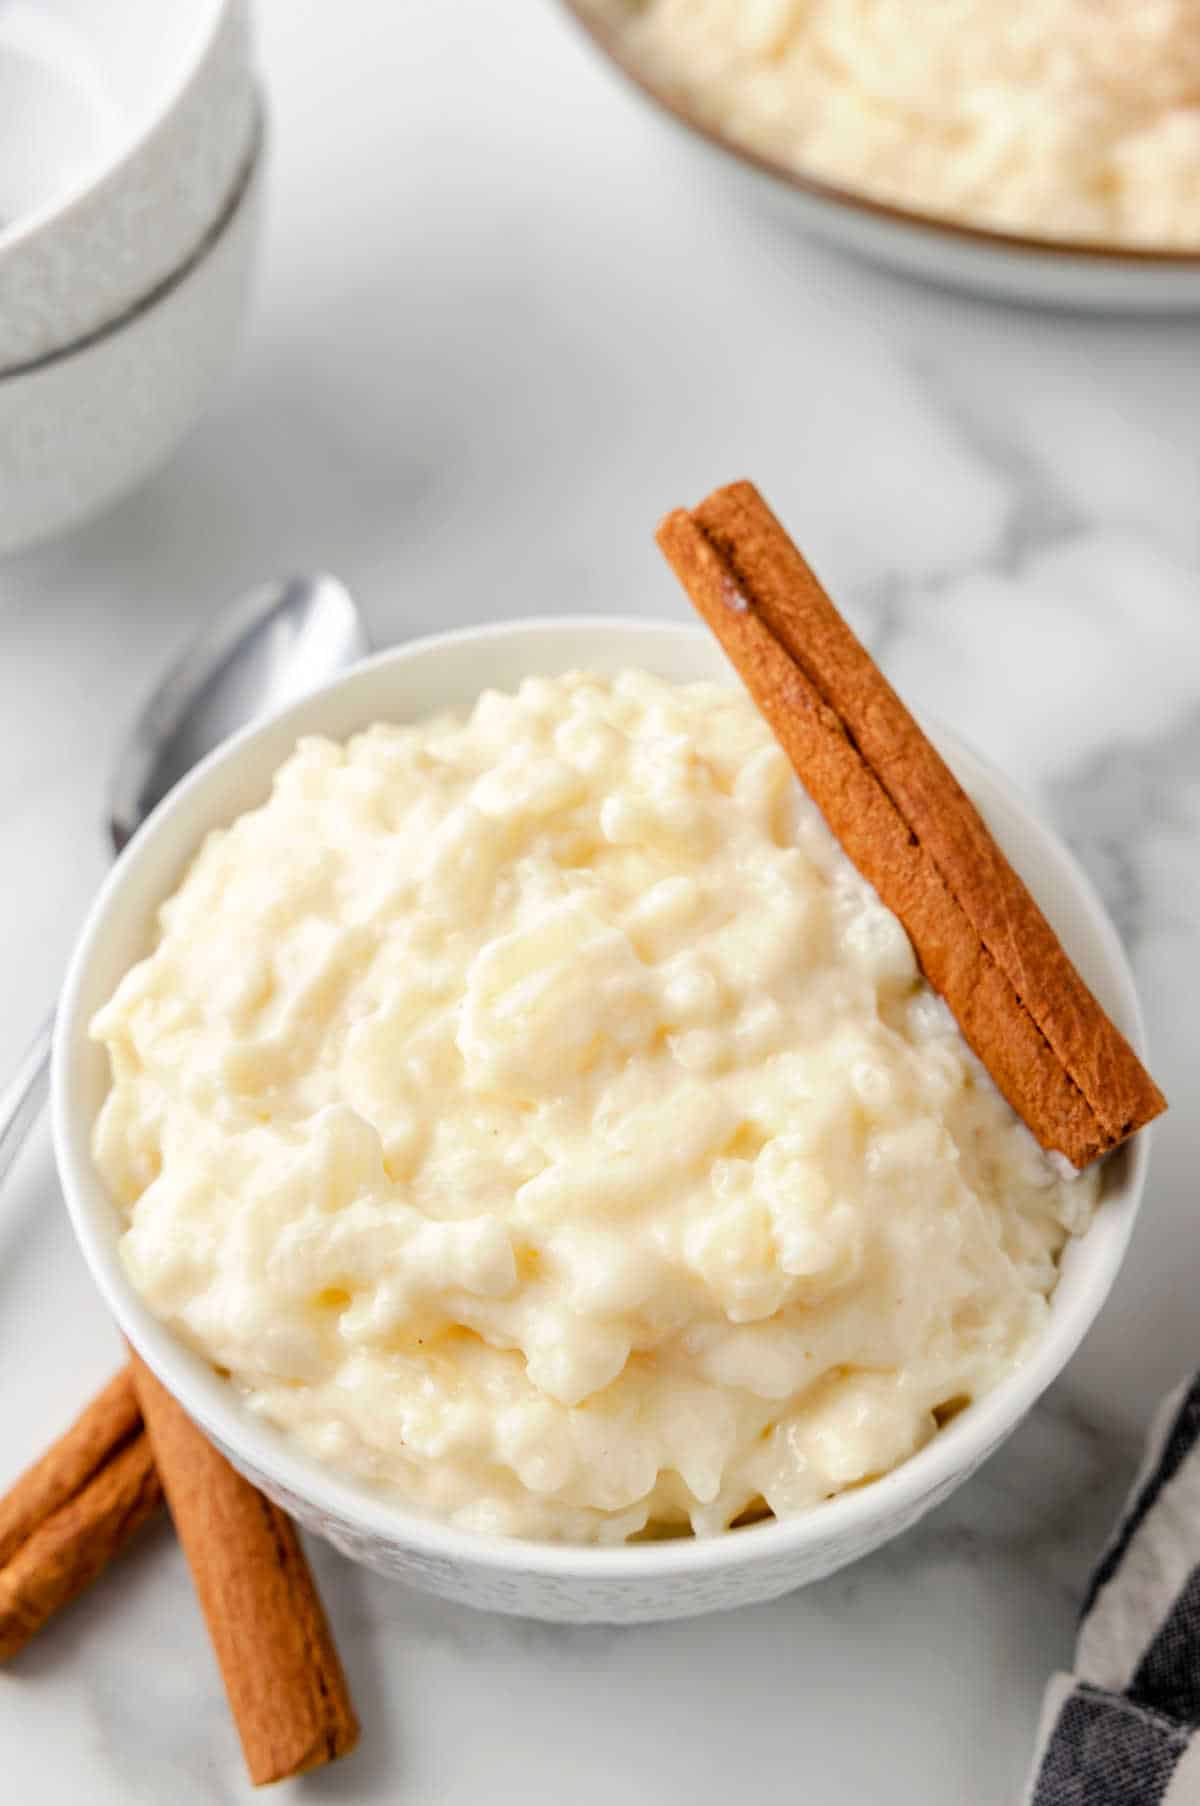 A bowl of rice pudding with a cinnamon stick on the edge of the bowl.